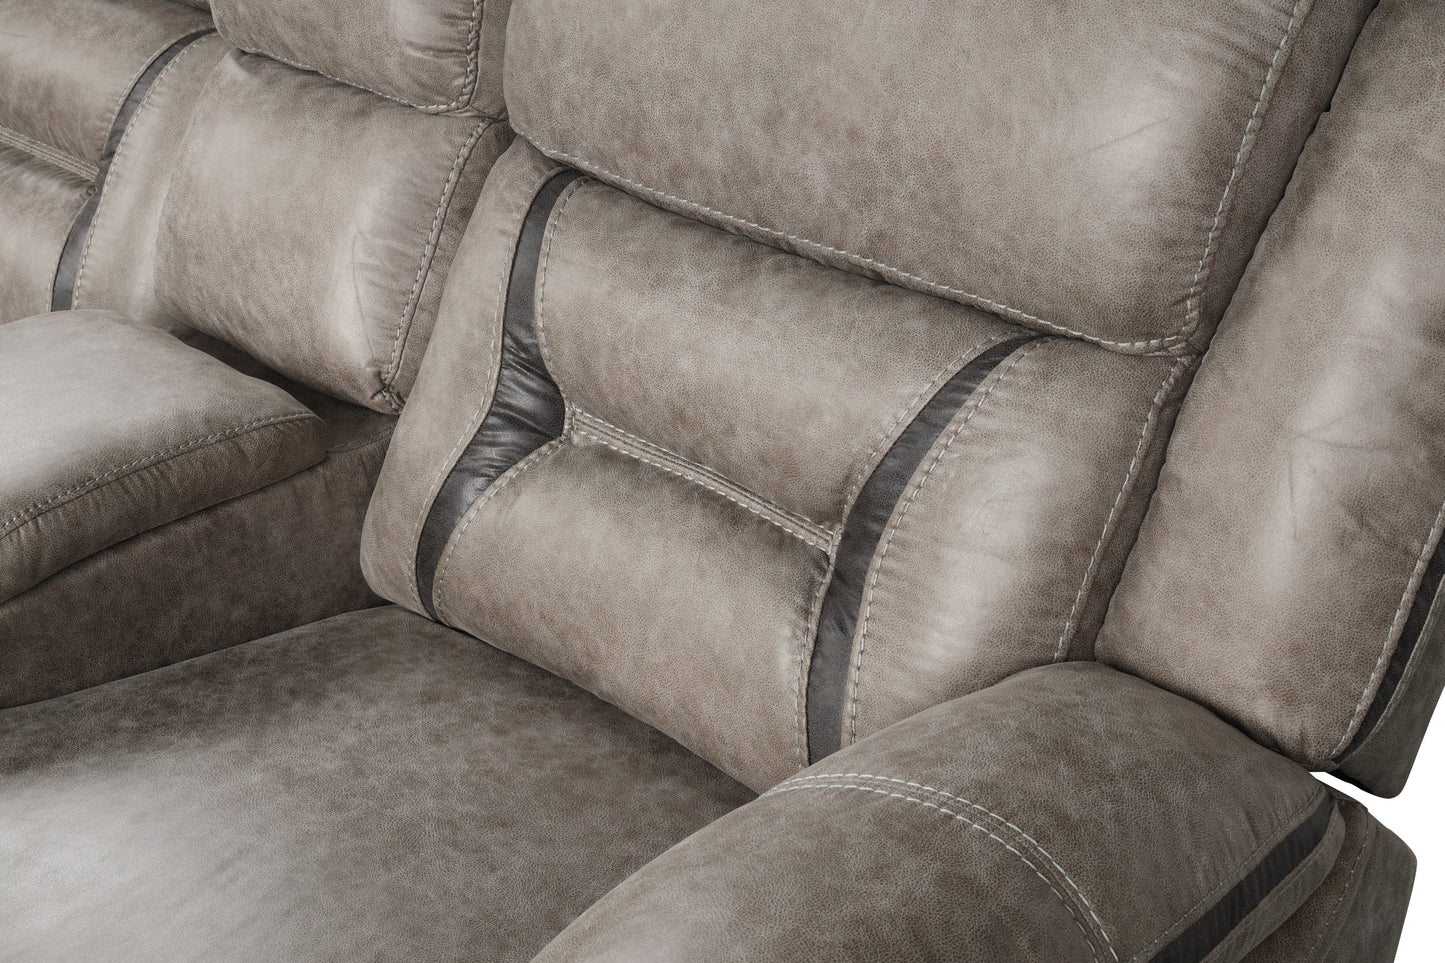 Elkton Manual Motion Reclining Loveseat with Storage Console, Taupe